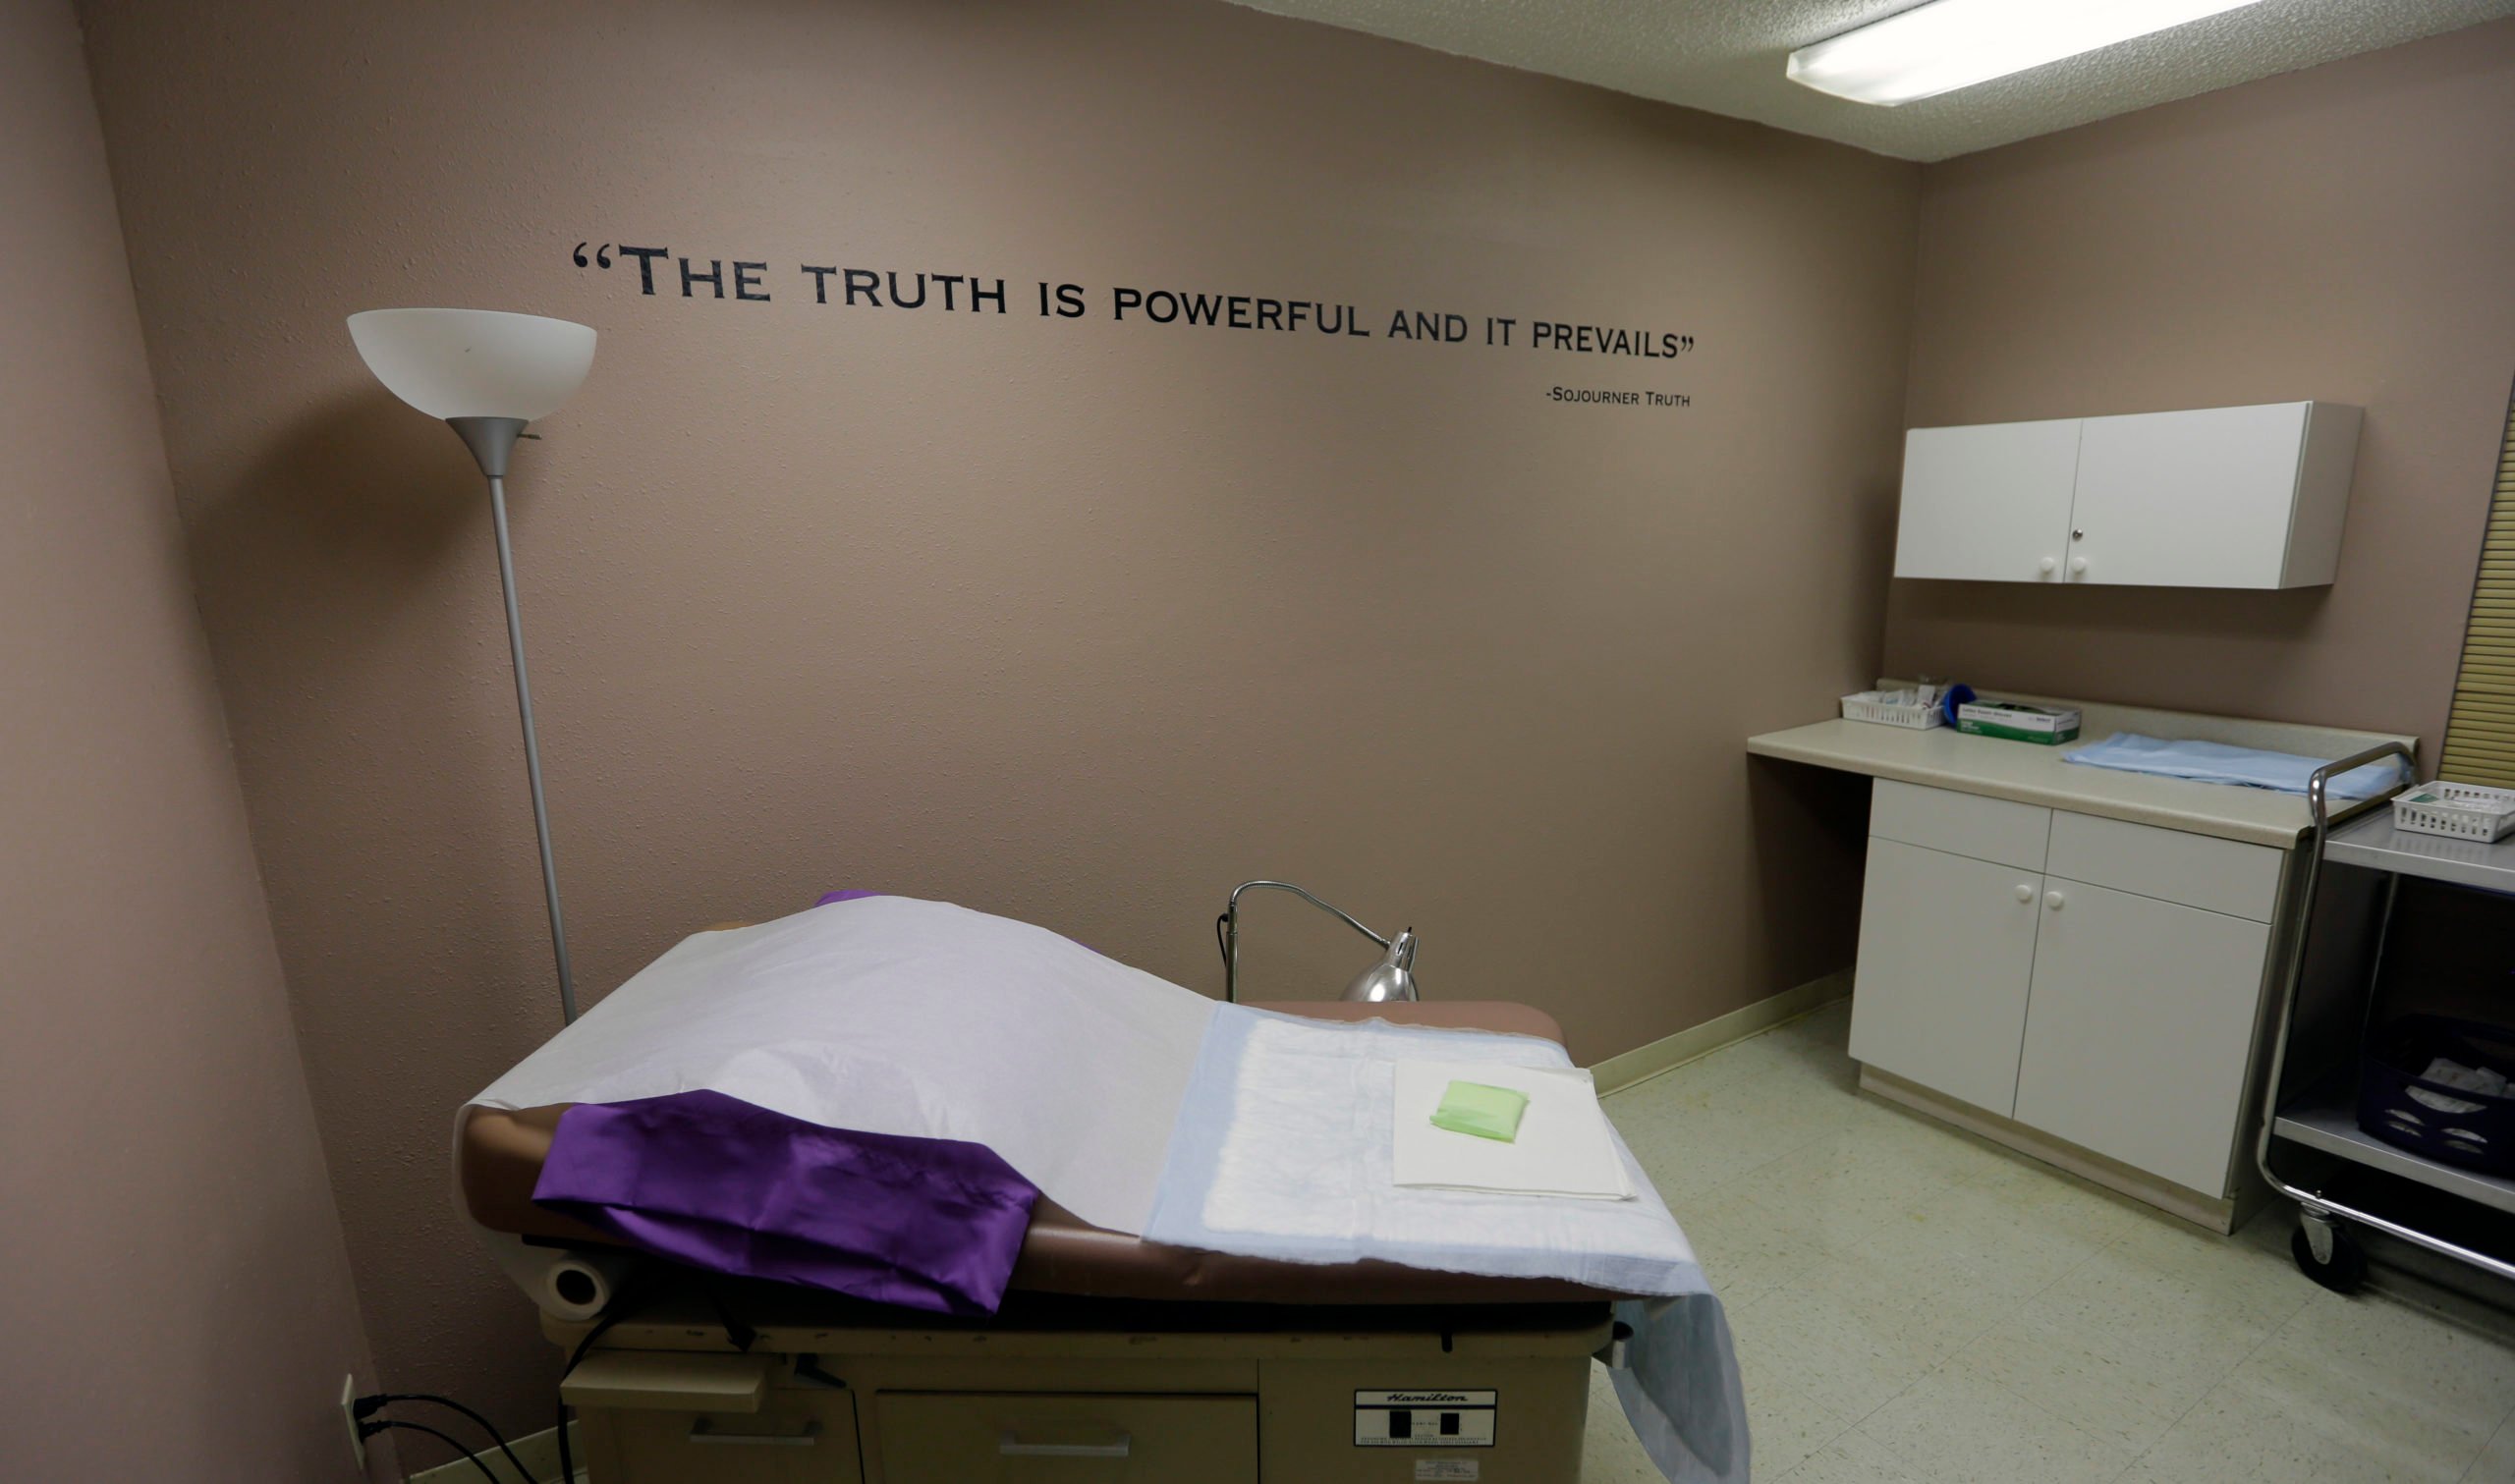 A room formally used as an examination room for abortions is seen at Choice Clinic, formerly Whole Woman's Health Clinic, Monday, June 27, 2016, in Austin, Texas. A U.S. Supreme Court ruling Monday that struck down some Texas abortion regulations saying they are medically unnecessary, and that they unconstitutionally limit women's abortion rights. (AP Photo/Eric Gay)